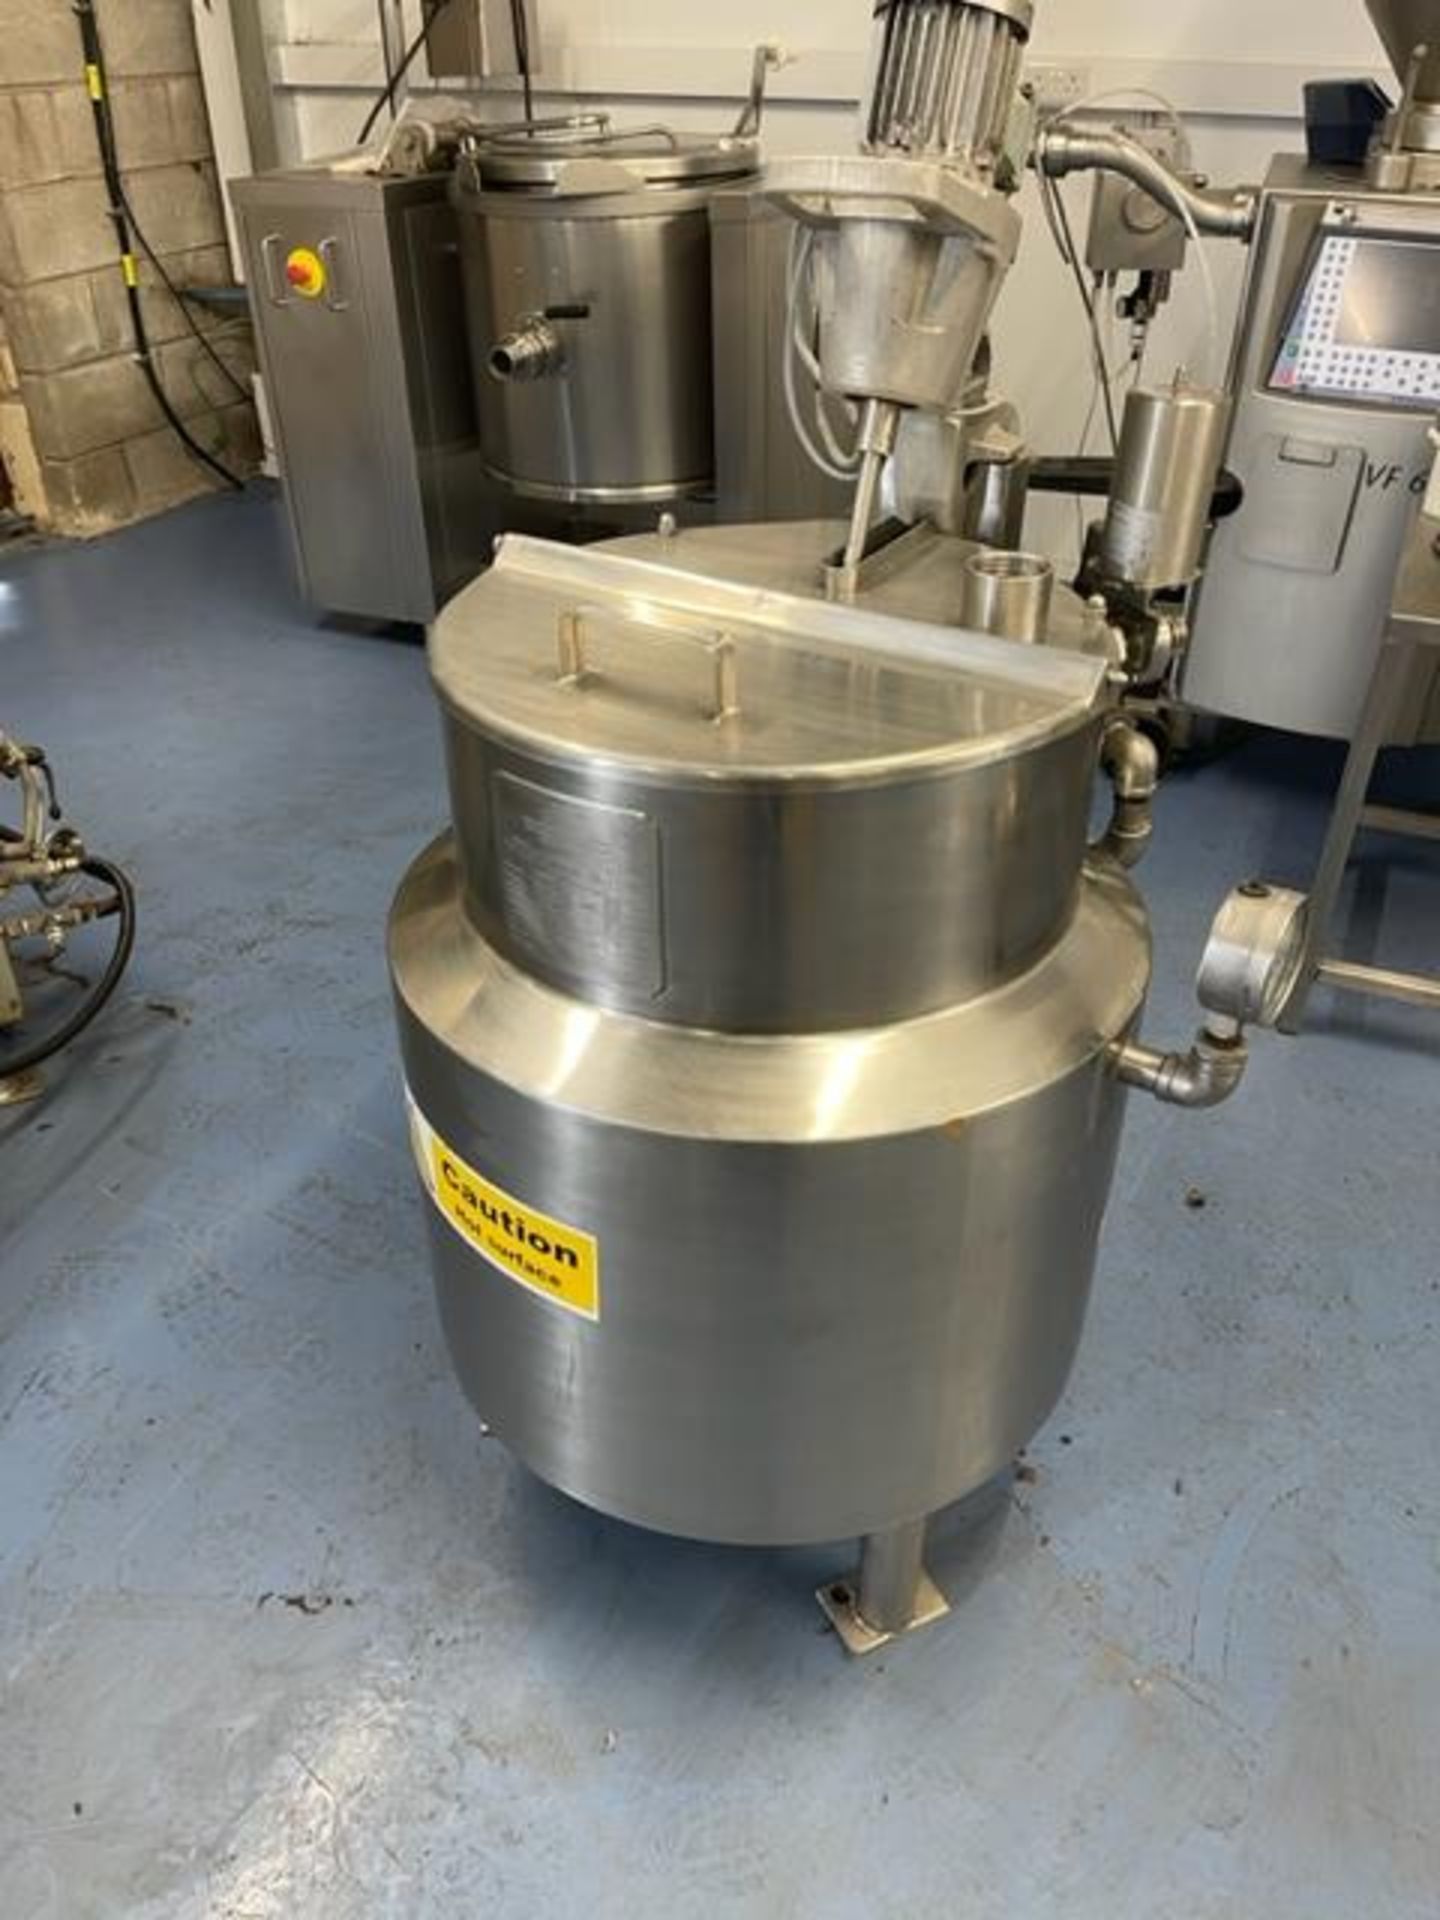 S/S GIUSTI 100 LITRE JACKETED VESSEL. - Image 2 of 5